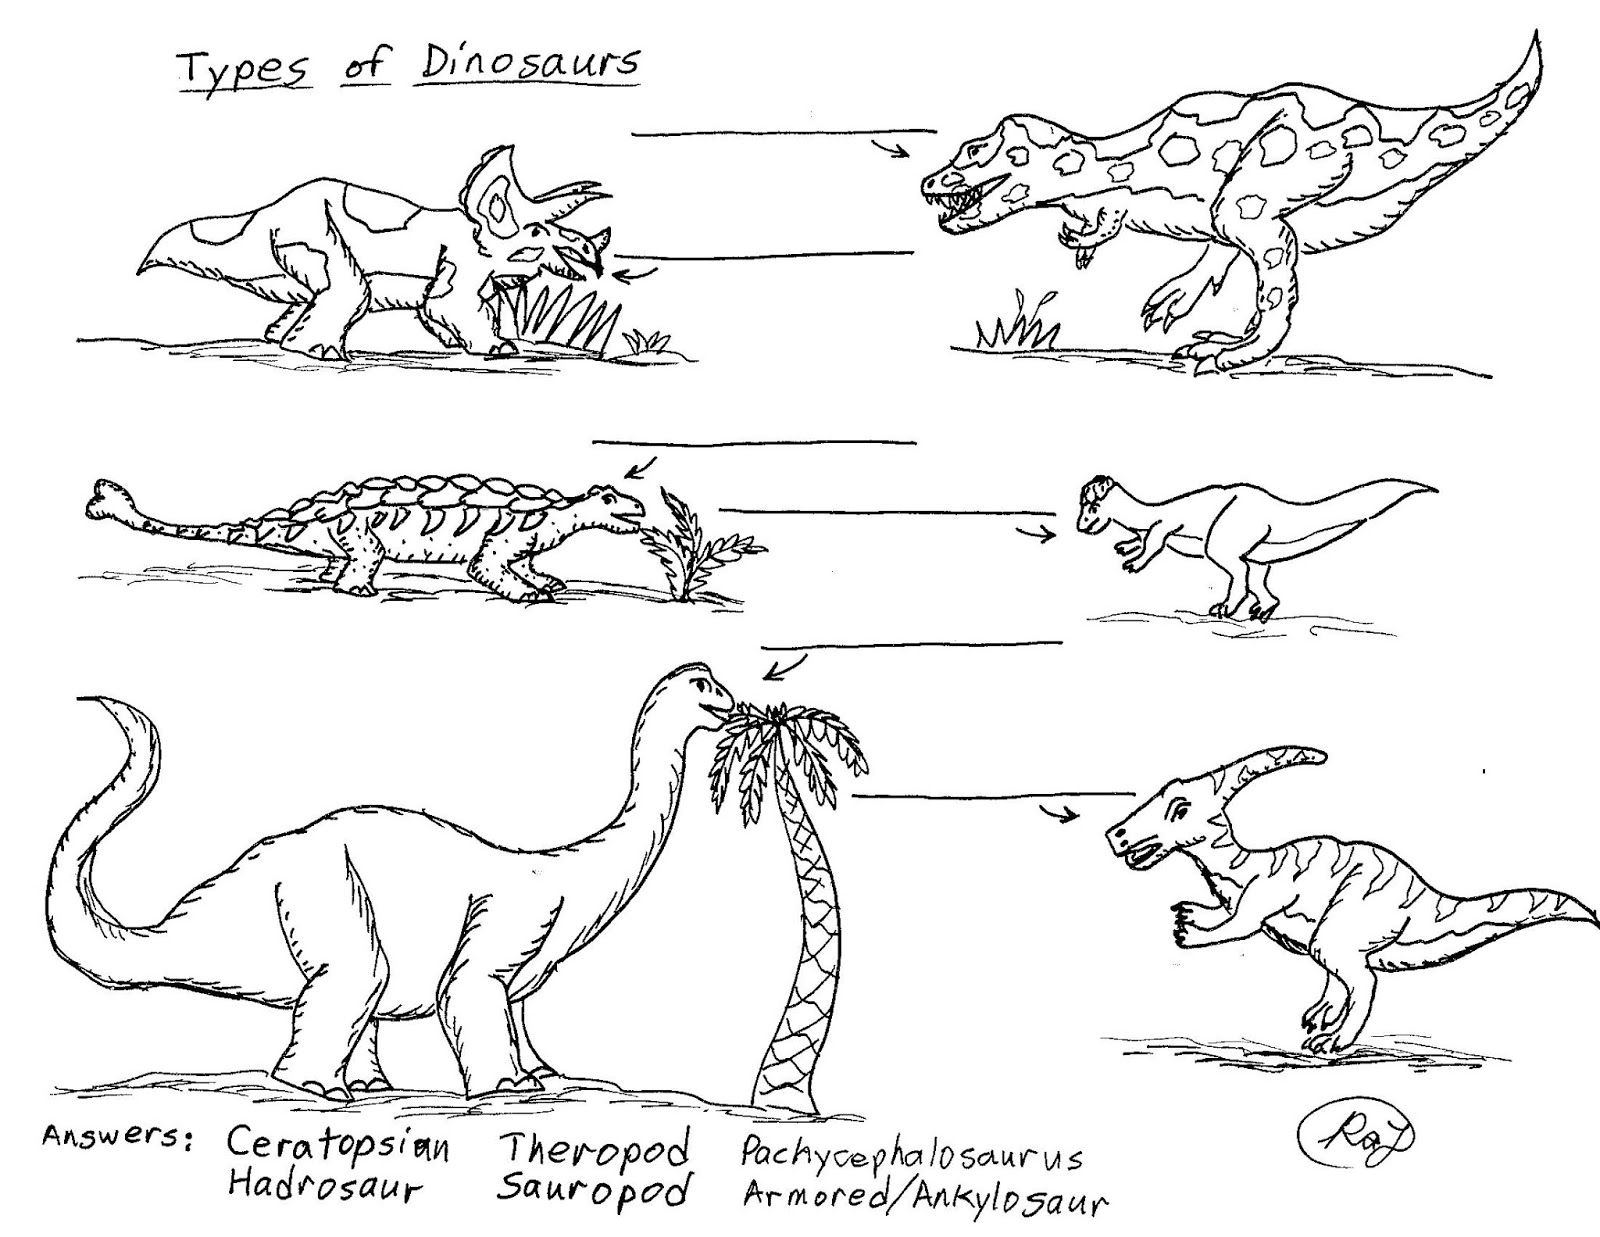 robin-s-great-coloring-pages-types-of-dinosaurs-worksheet